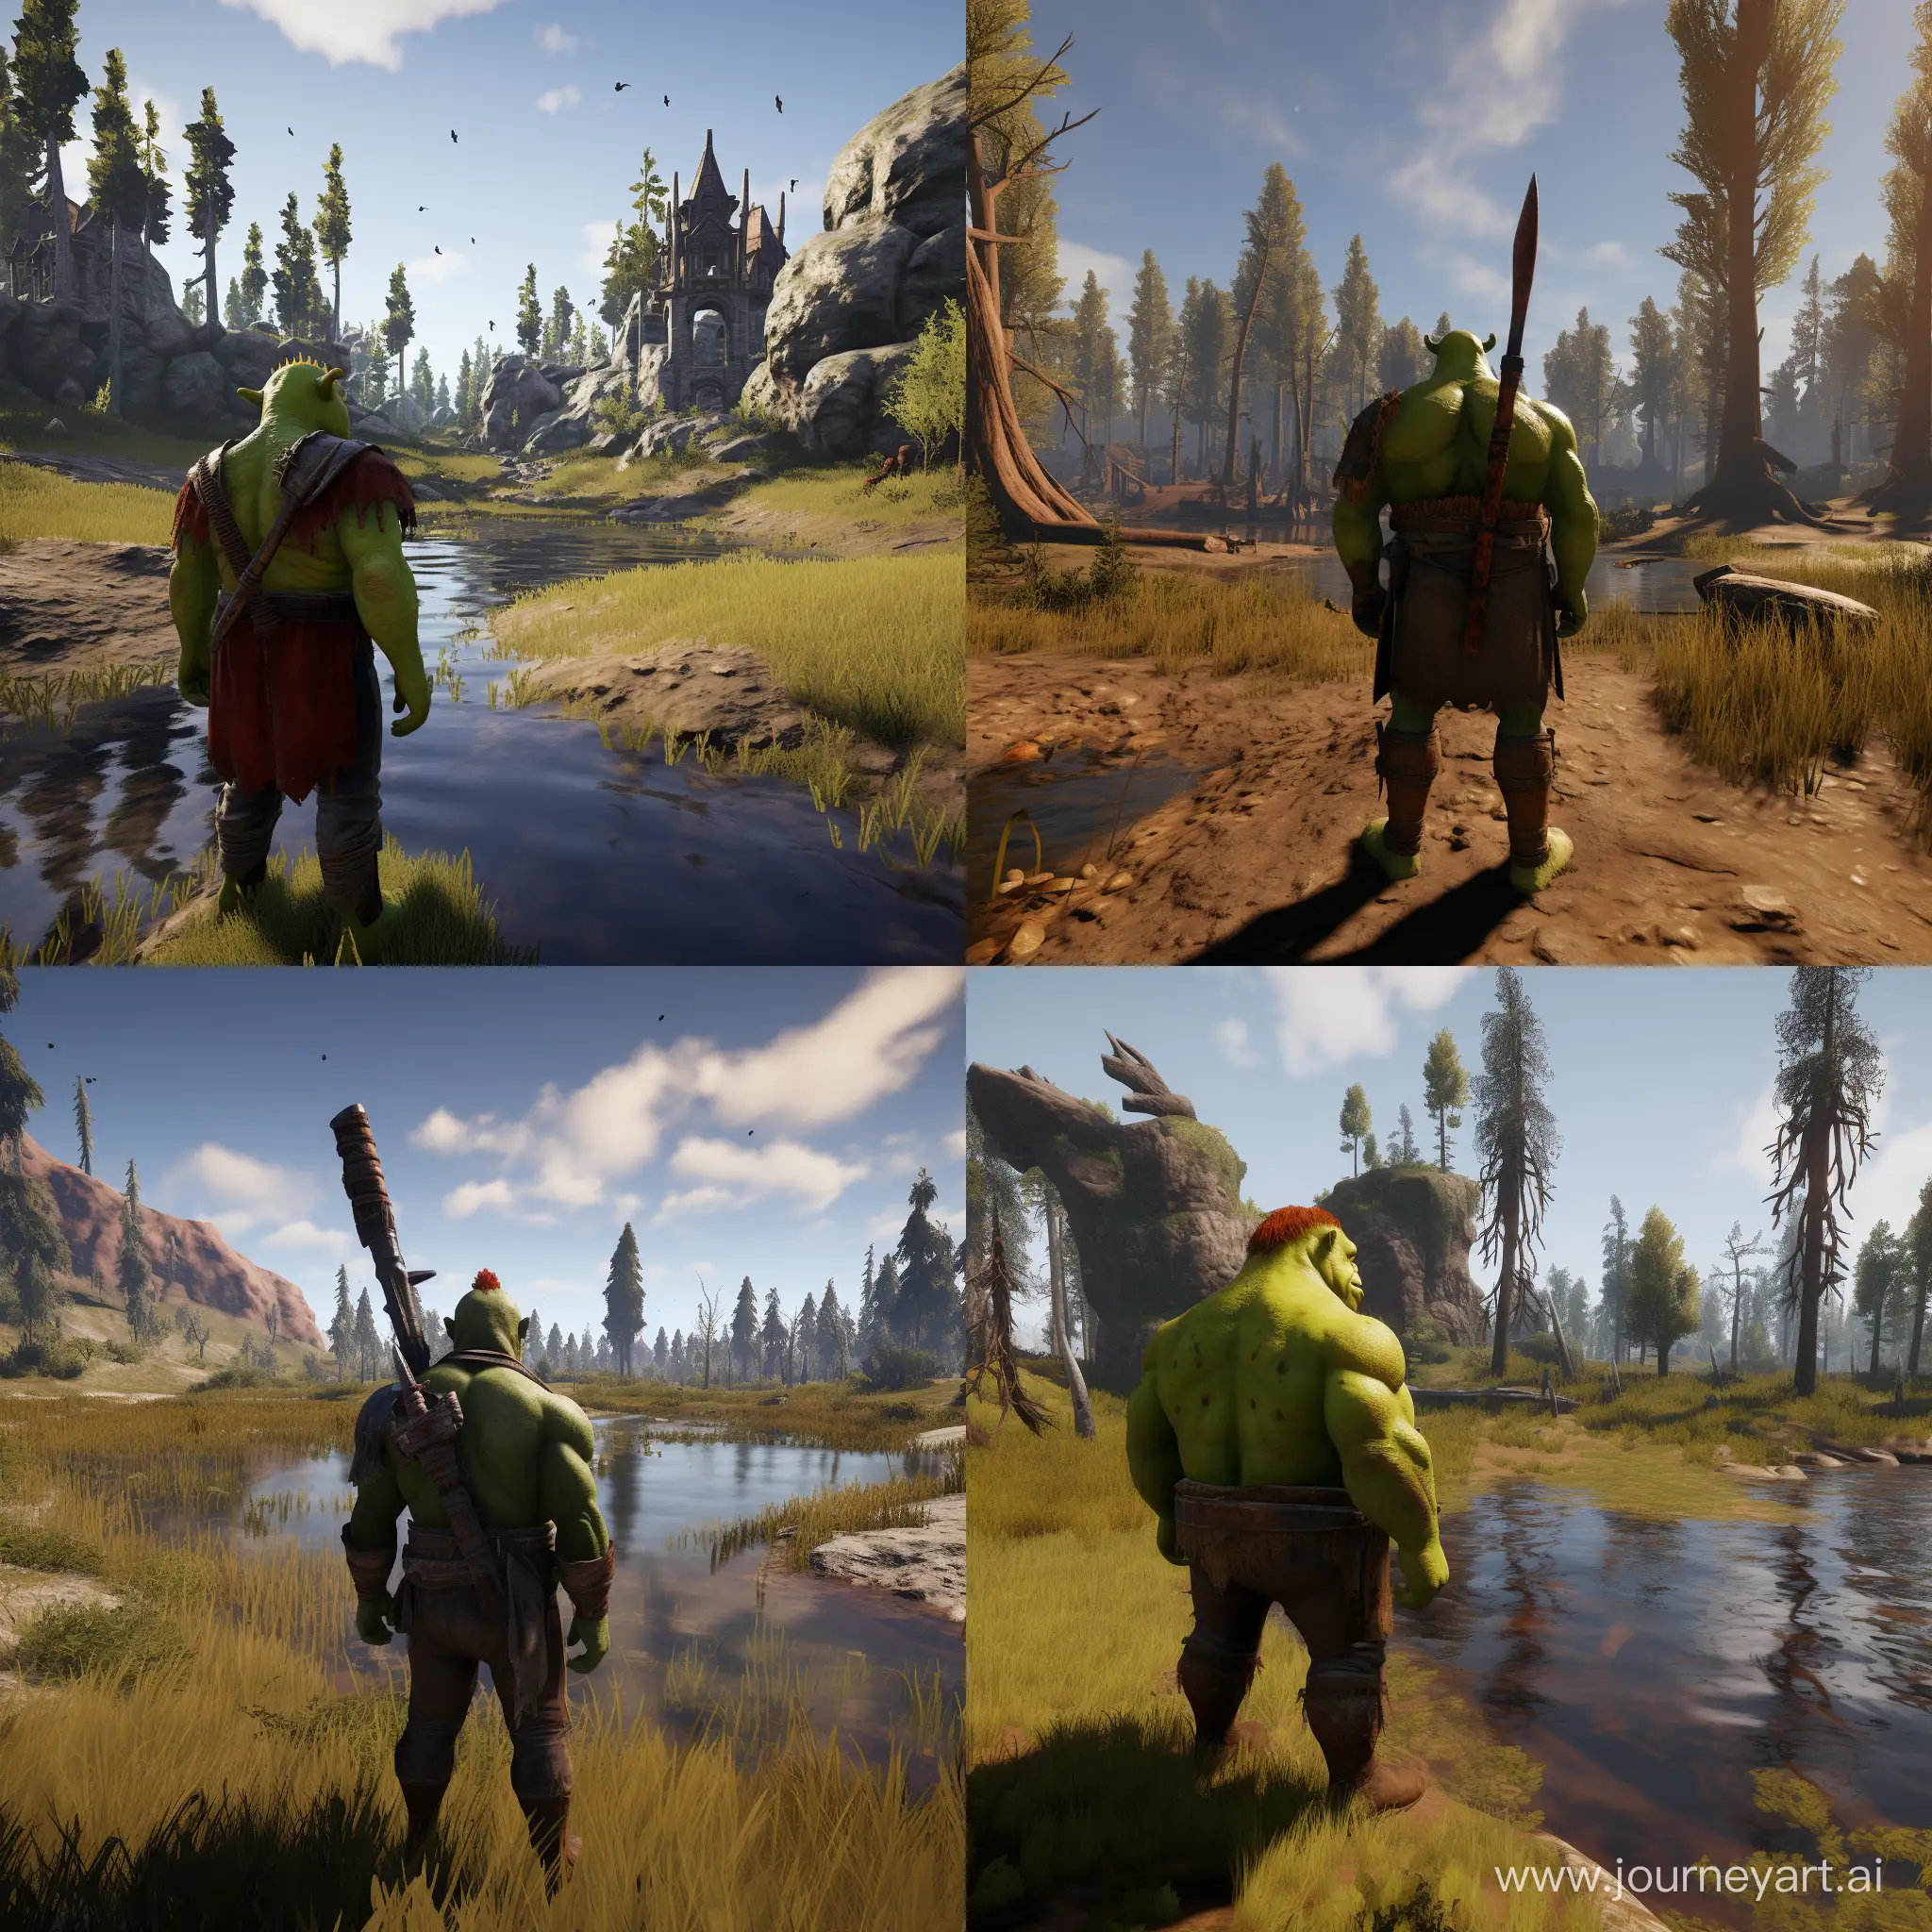 Shrek defends his swamp from raiders in the game Rust